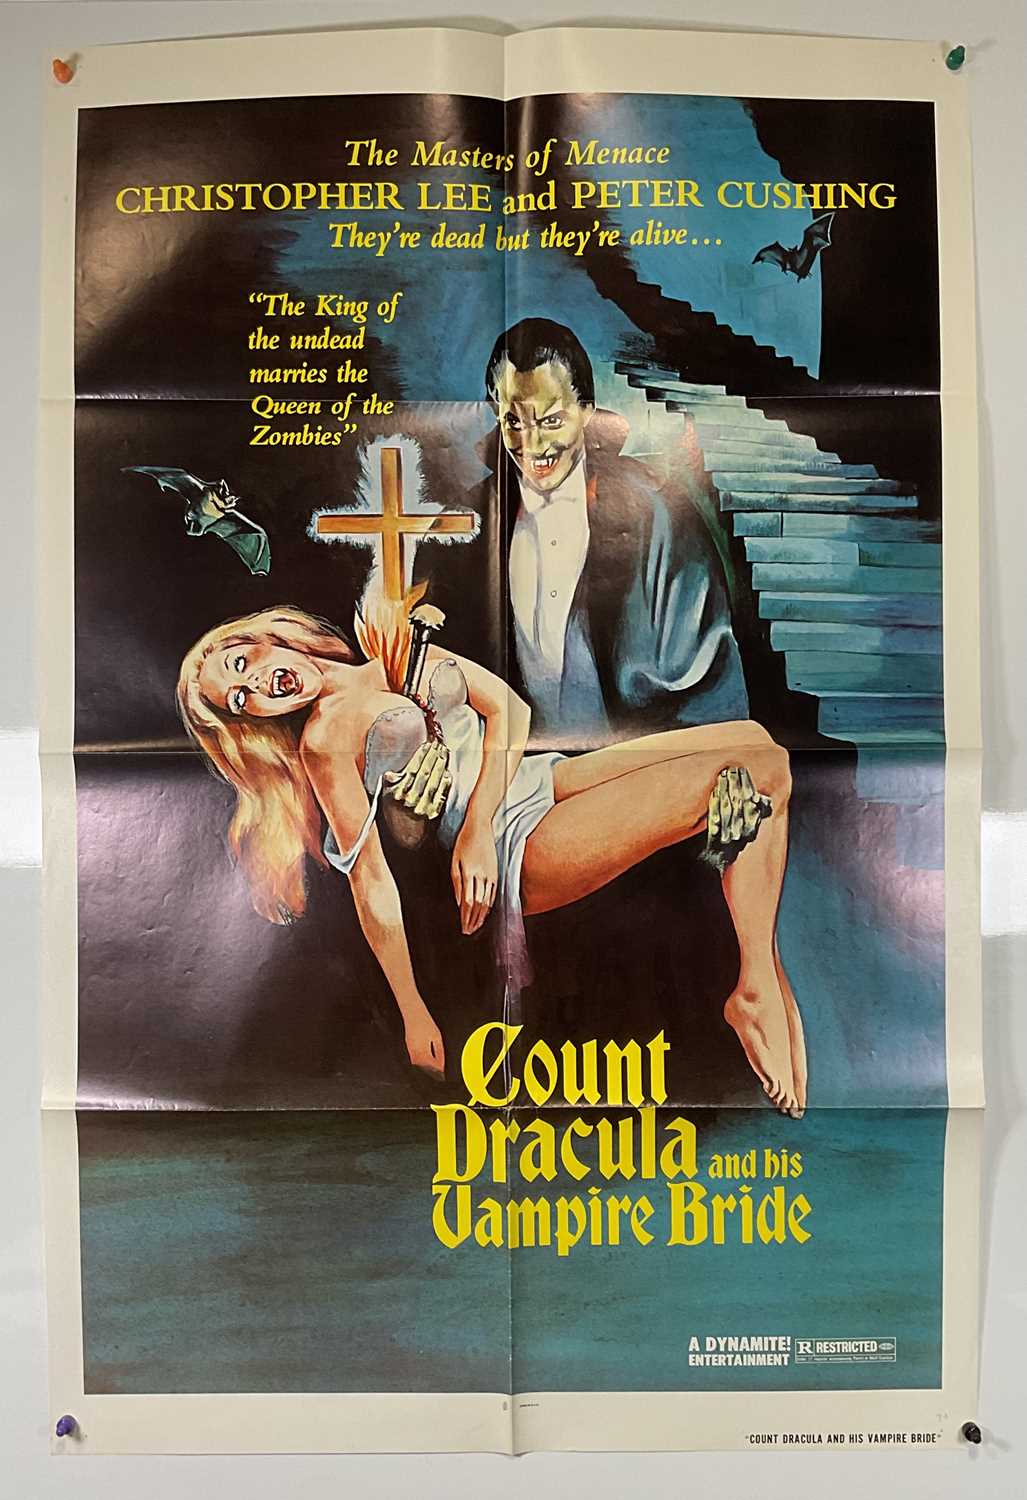 COUNT DRACULA AND HIS VAMPIRE BRIDE (1978) US one sheet movie poster, released in the UK